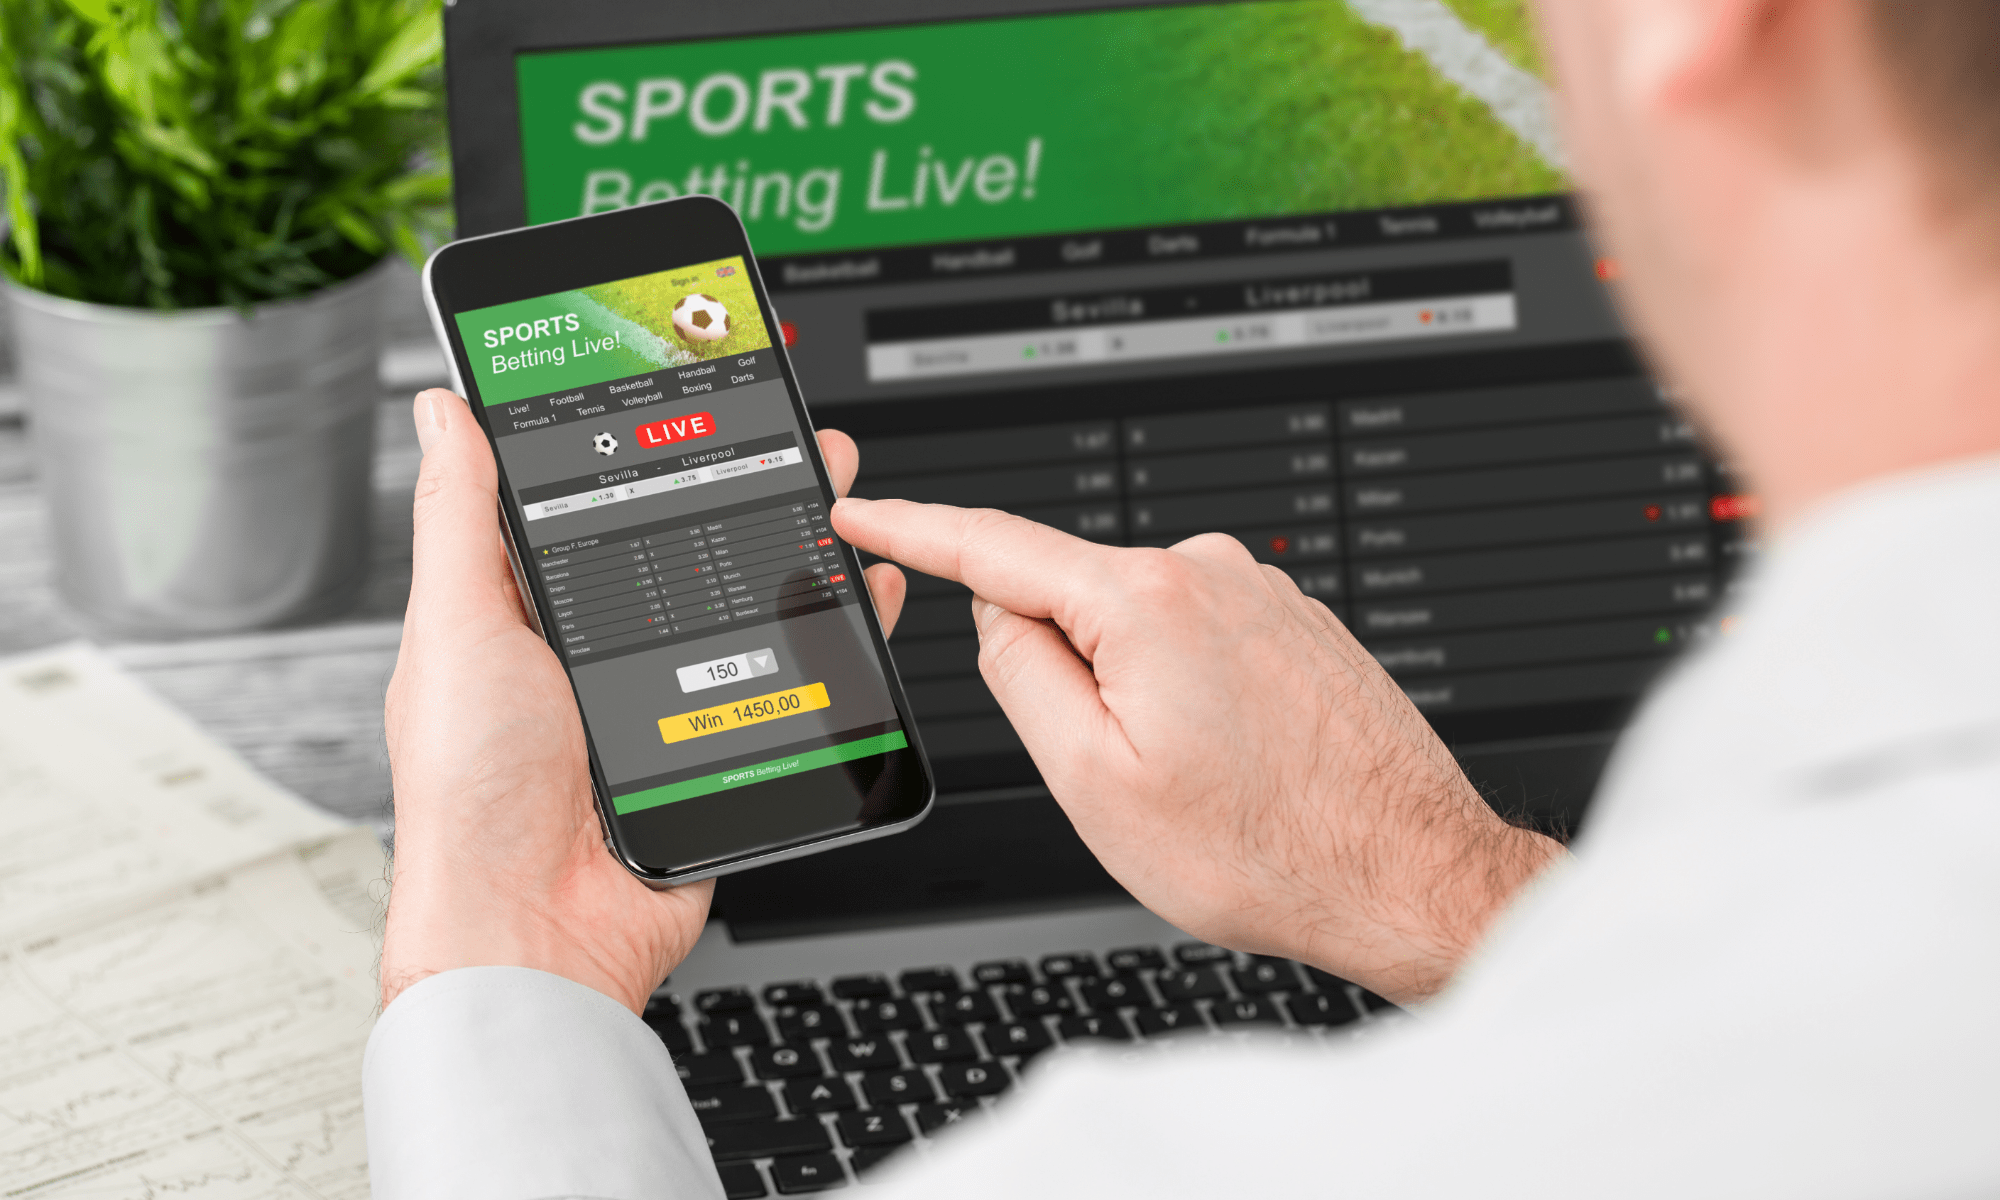 Get in the Action: How to Place Bets Easily using KwikBet’s SMS Betting Service